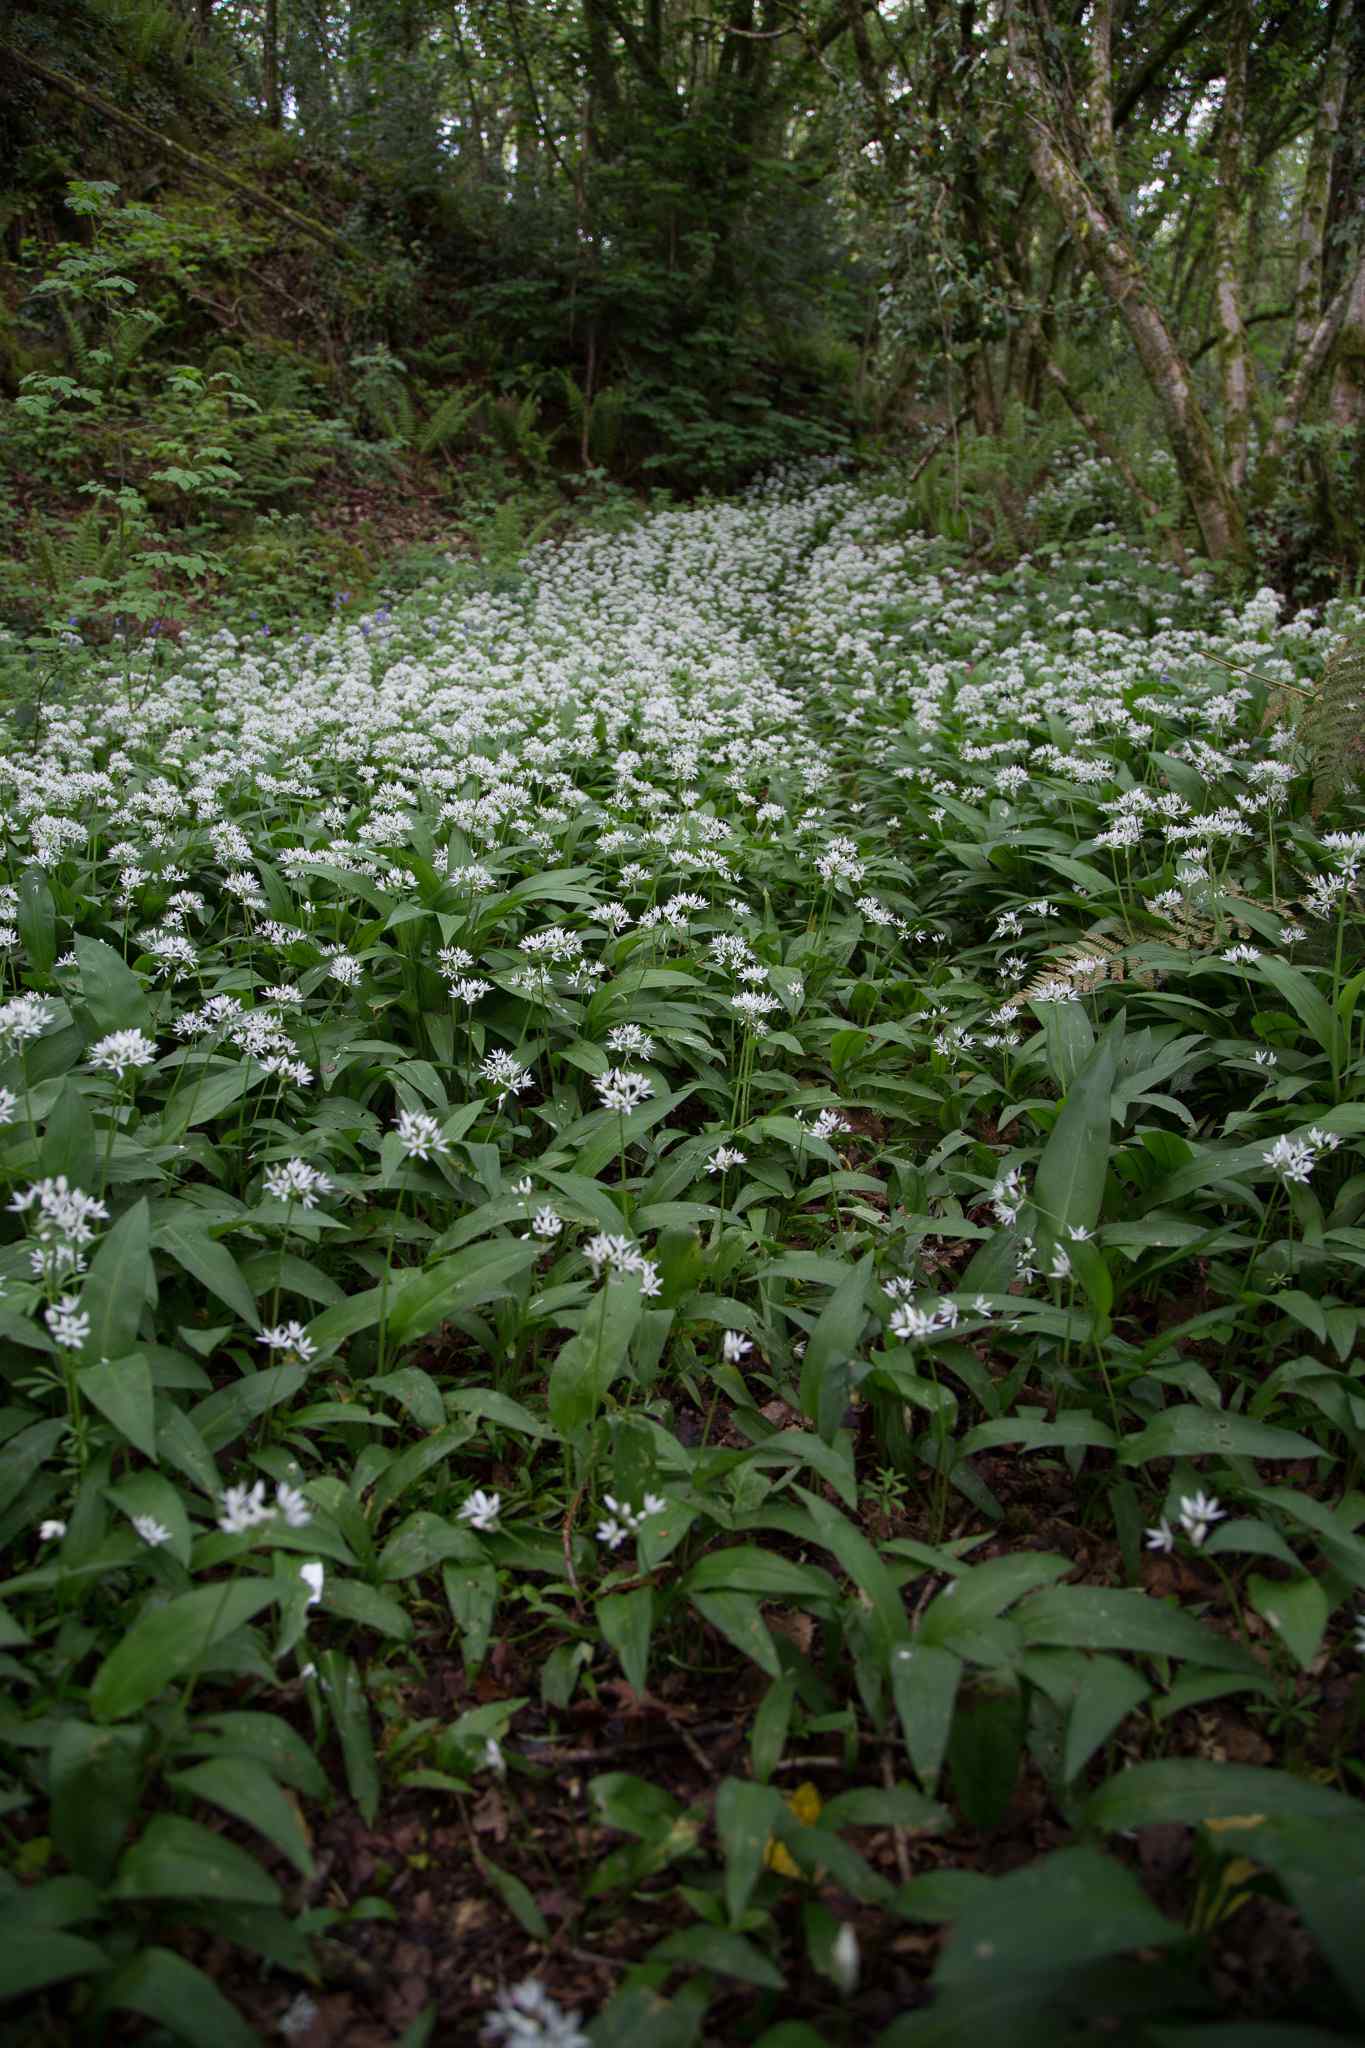 A carpet of Wild Garlic in the woods